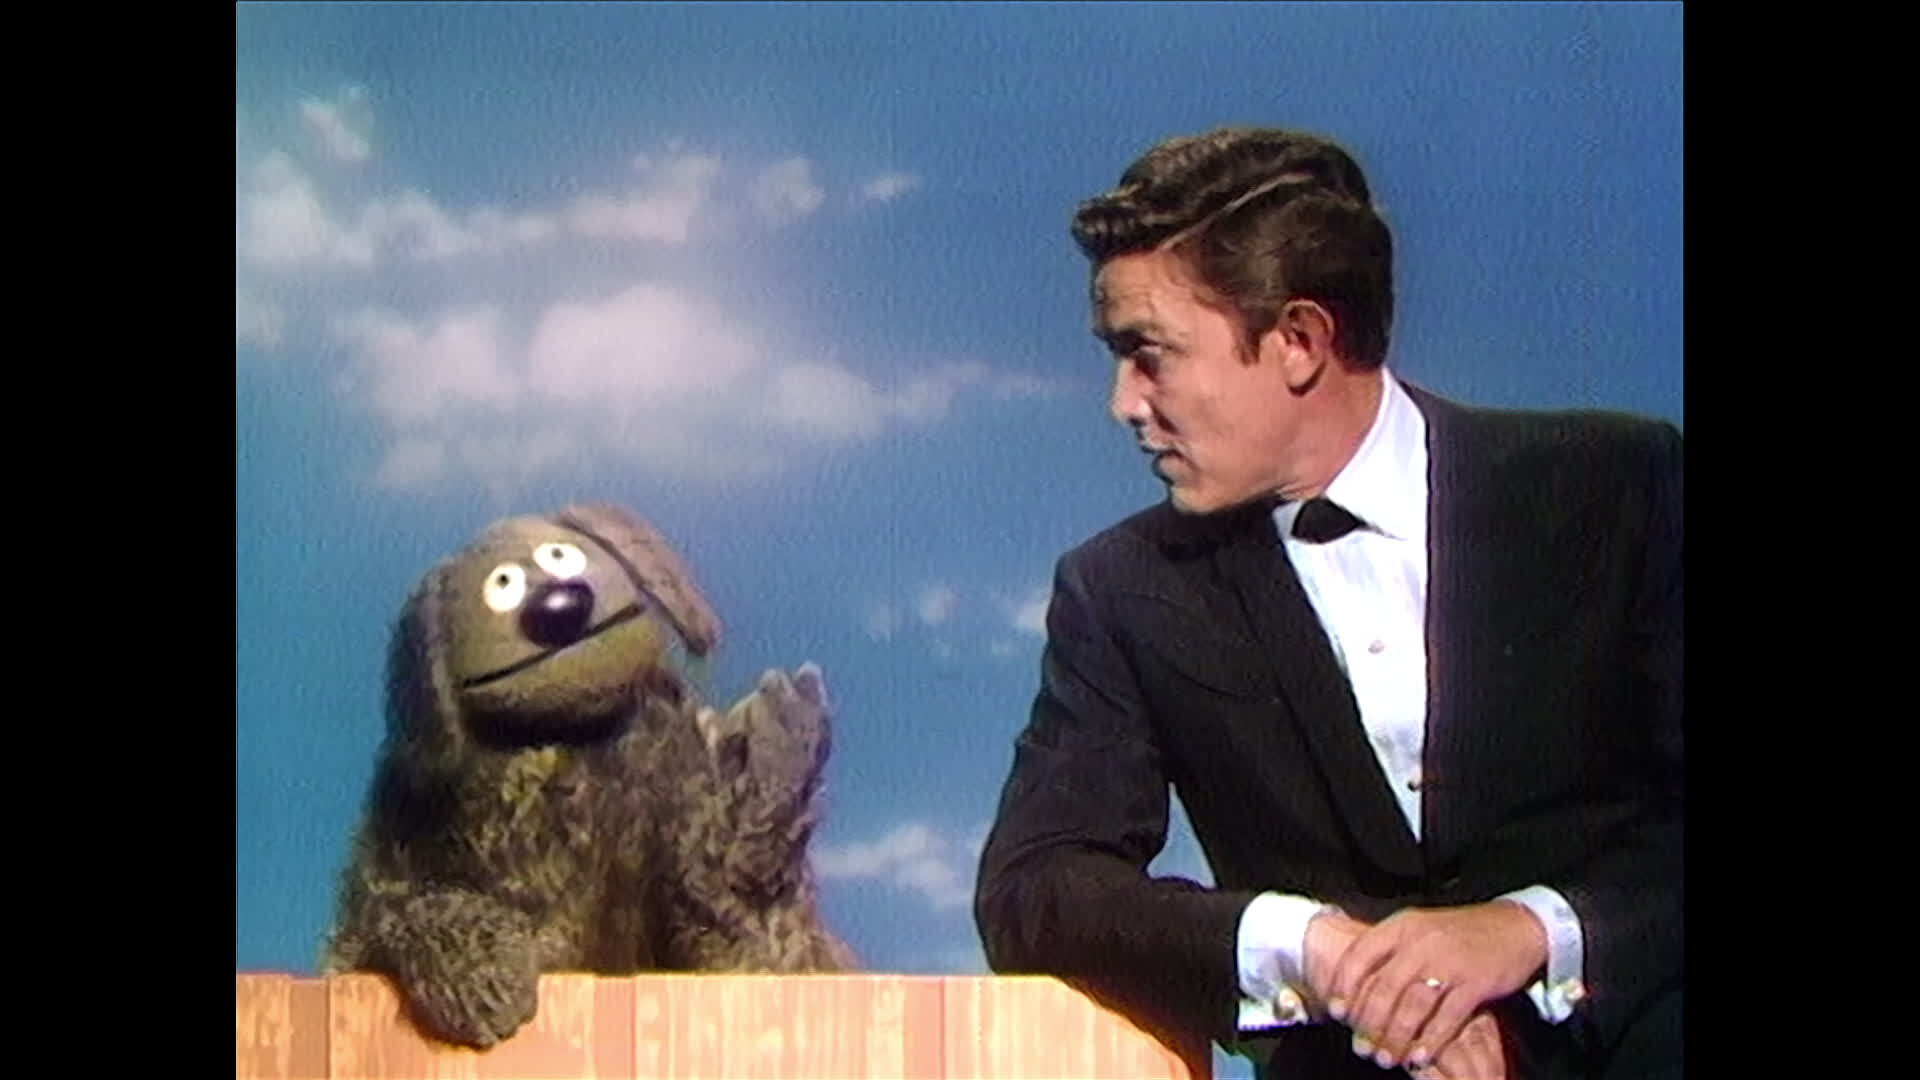 Jimmy Dean and Rowlf Sing "Friendship"